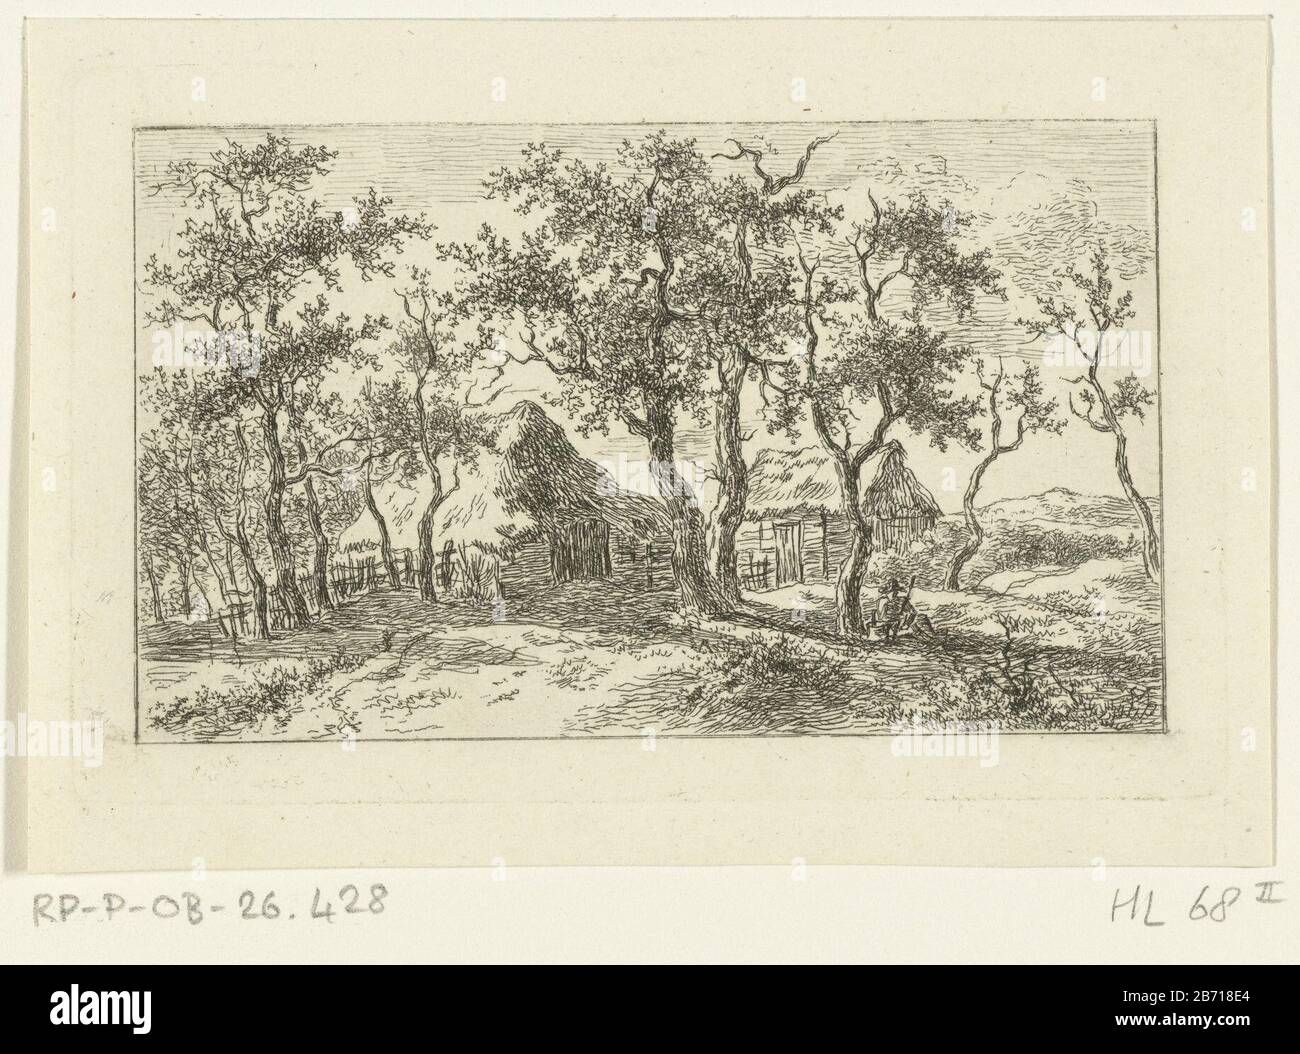 Landschap met boerderij en wandelaar Landscape with farm and hiker object type: picture Item number: RP-P-OB-26.428Catalogusreferentie: Hippert & Linnig 68Opmerking: 2 (2) based on collection RMA Manufacturer : printmaker Ernst Willem Jan BagelaarPlaats manufacture: Netherlands Date: 1798 - 1837 Physical characteristics: etching and dry point material: paper Technique: etching / dry point measurements: plate edge: h 75 mm × W 115 mm Subject: solitary farm or house in landscape Stock Photo